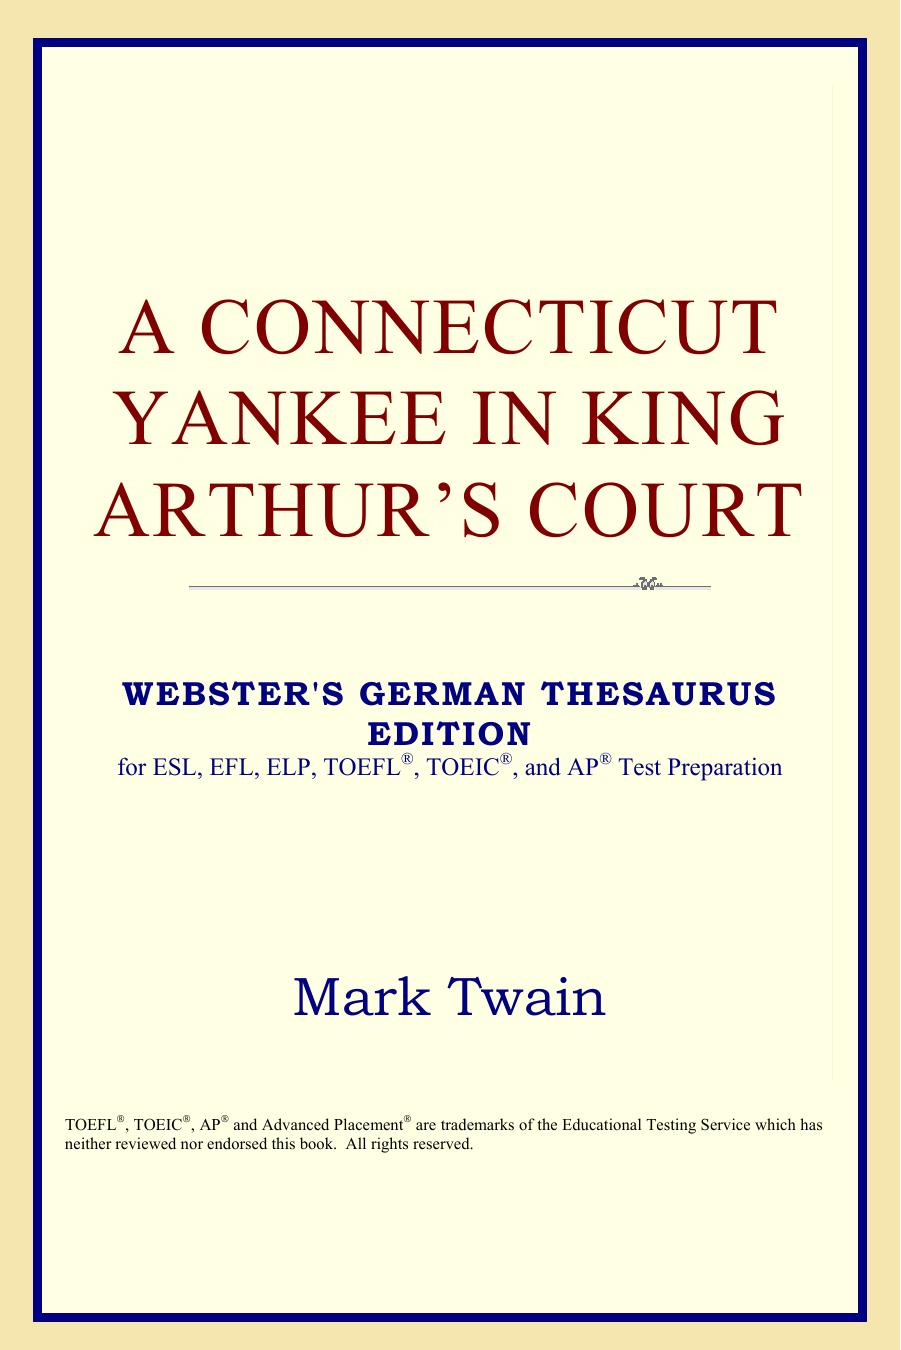 A Connecticut Yankee in King Arthurs Court (Websters German Thesaurus Edition) by Mark Twain